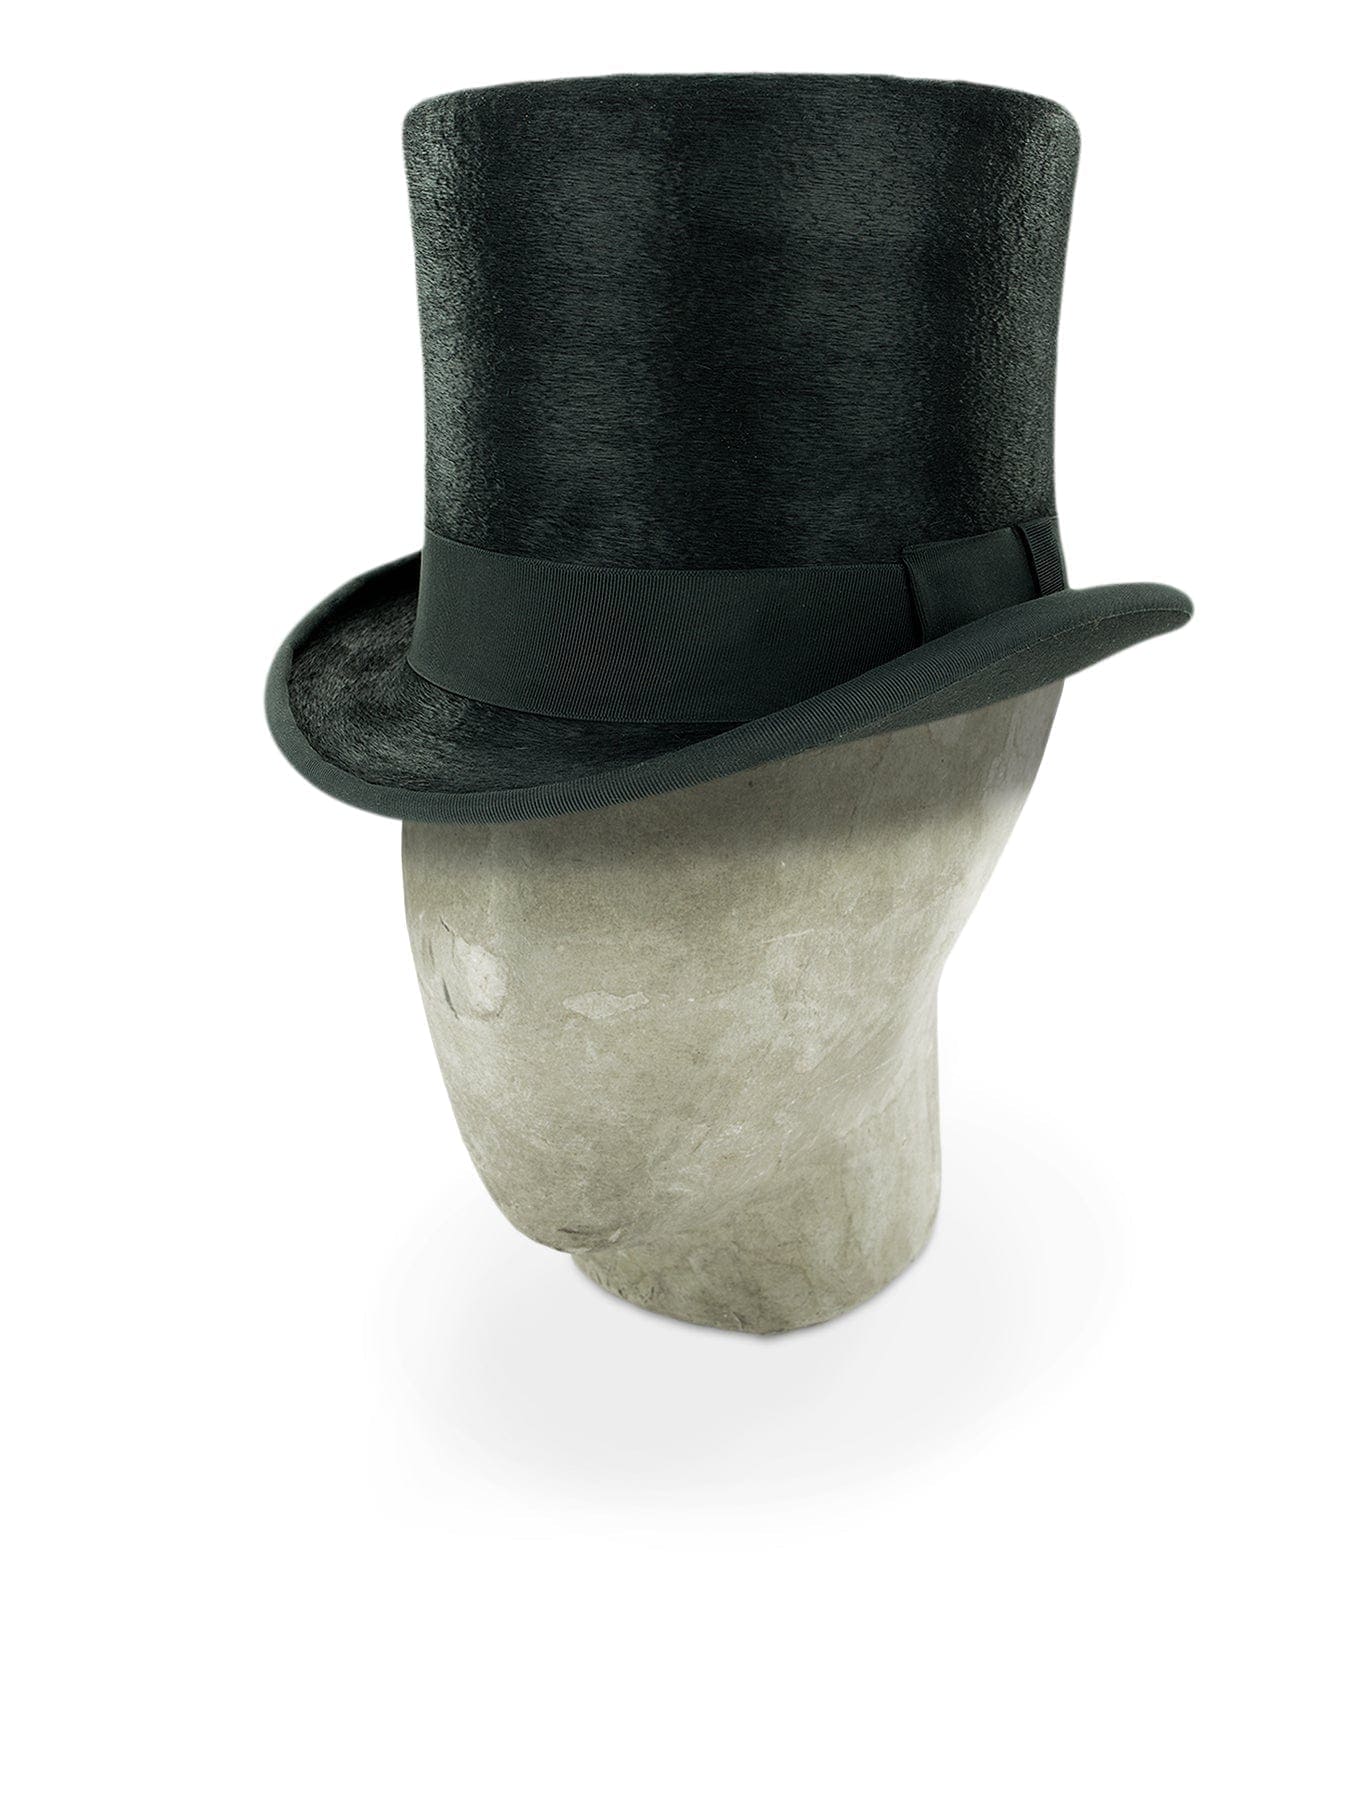 Black Made In London Top Hat - Hilditch & Key